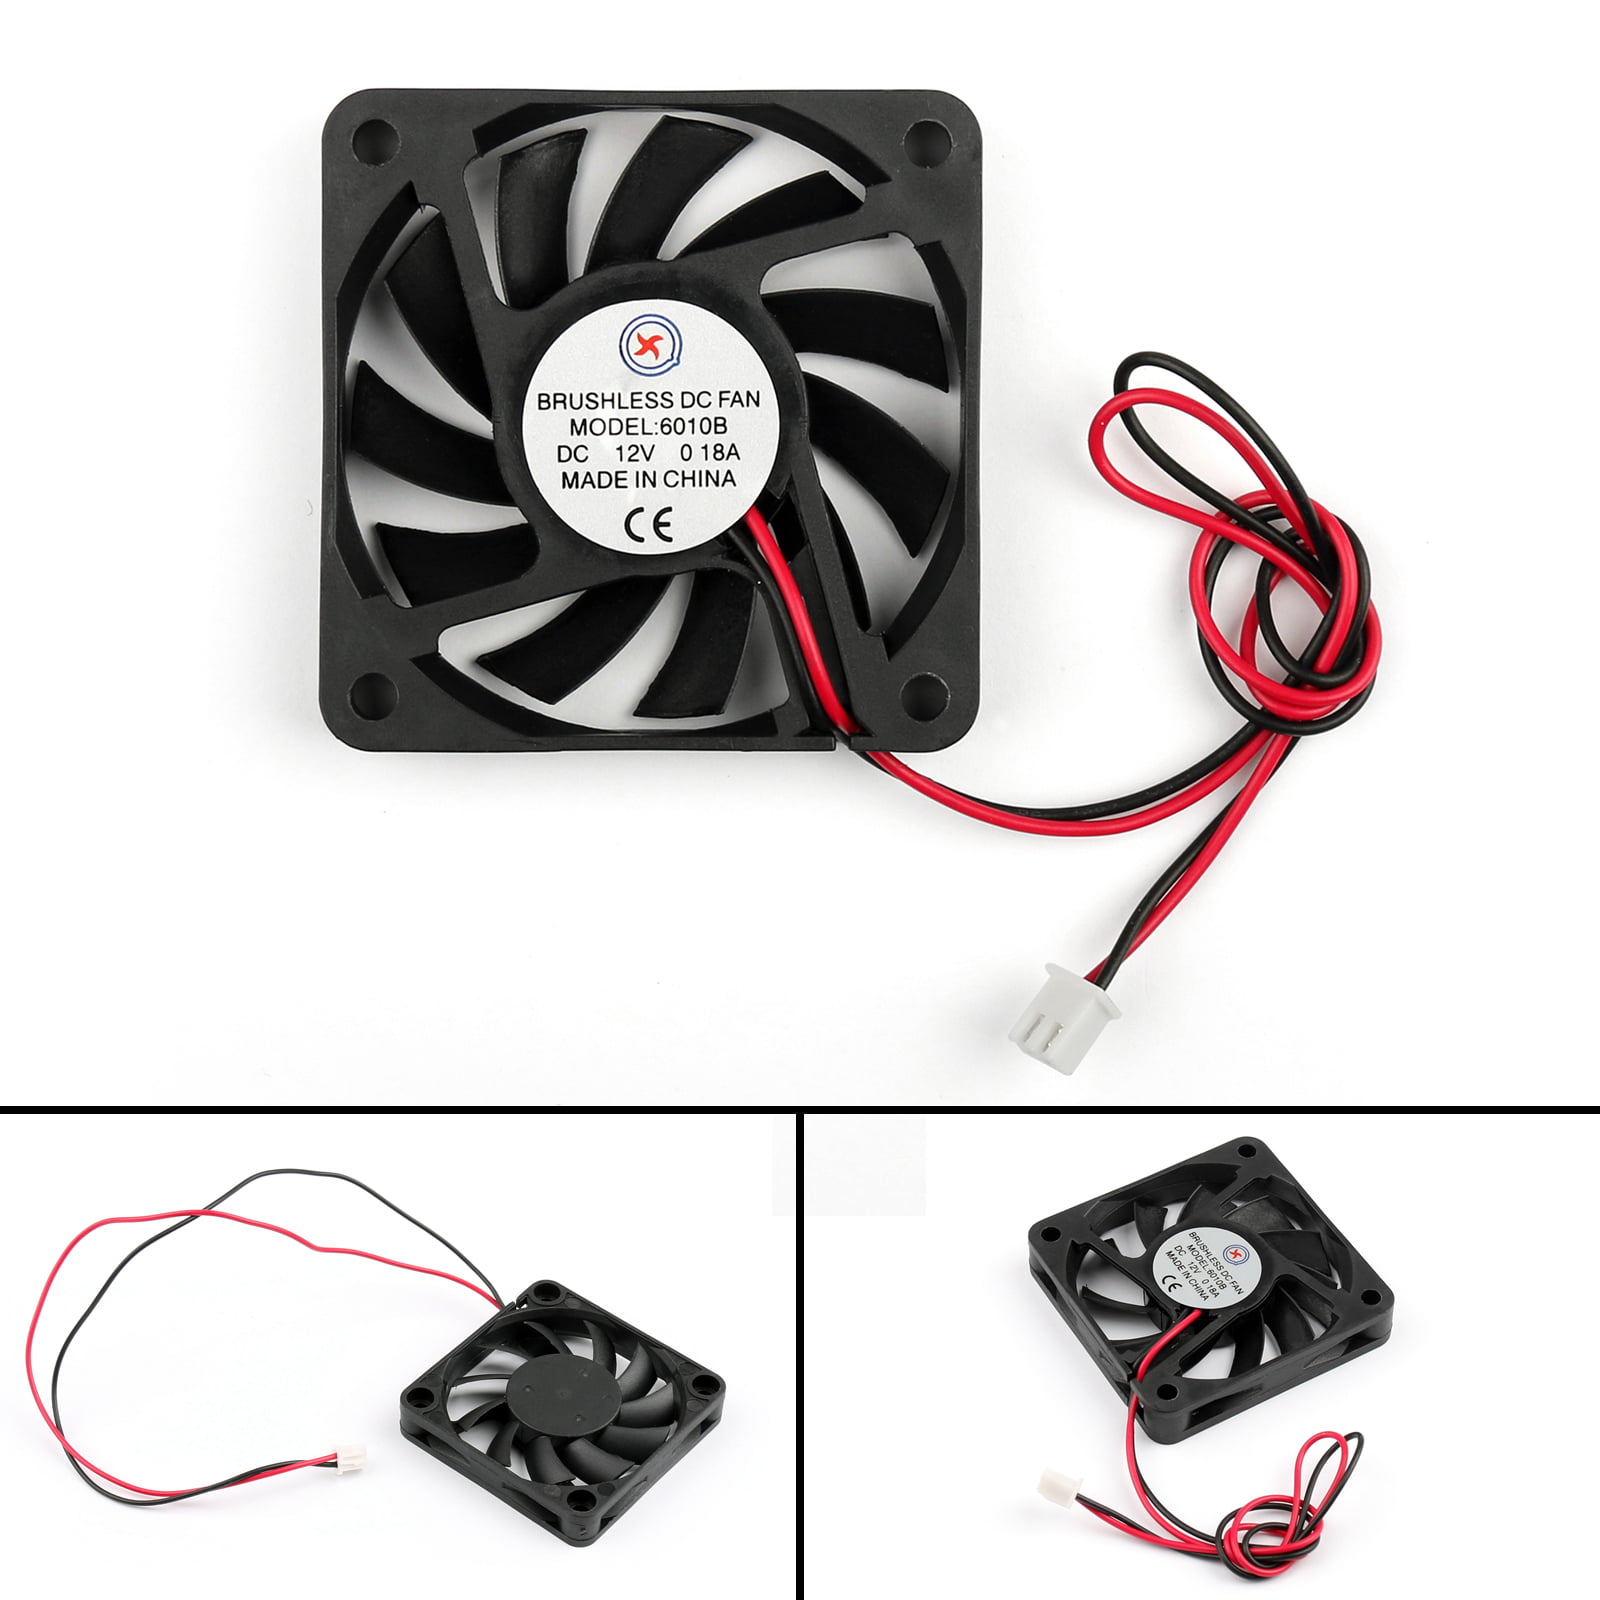 DC Brushless Cooling Fan 12V 0.2A 9025S 90x90x25mm 2 Pin CUP Computer Fan UE 